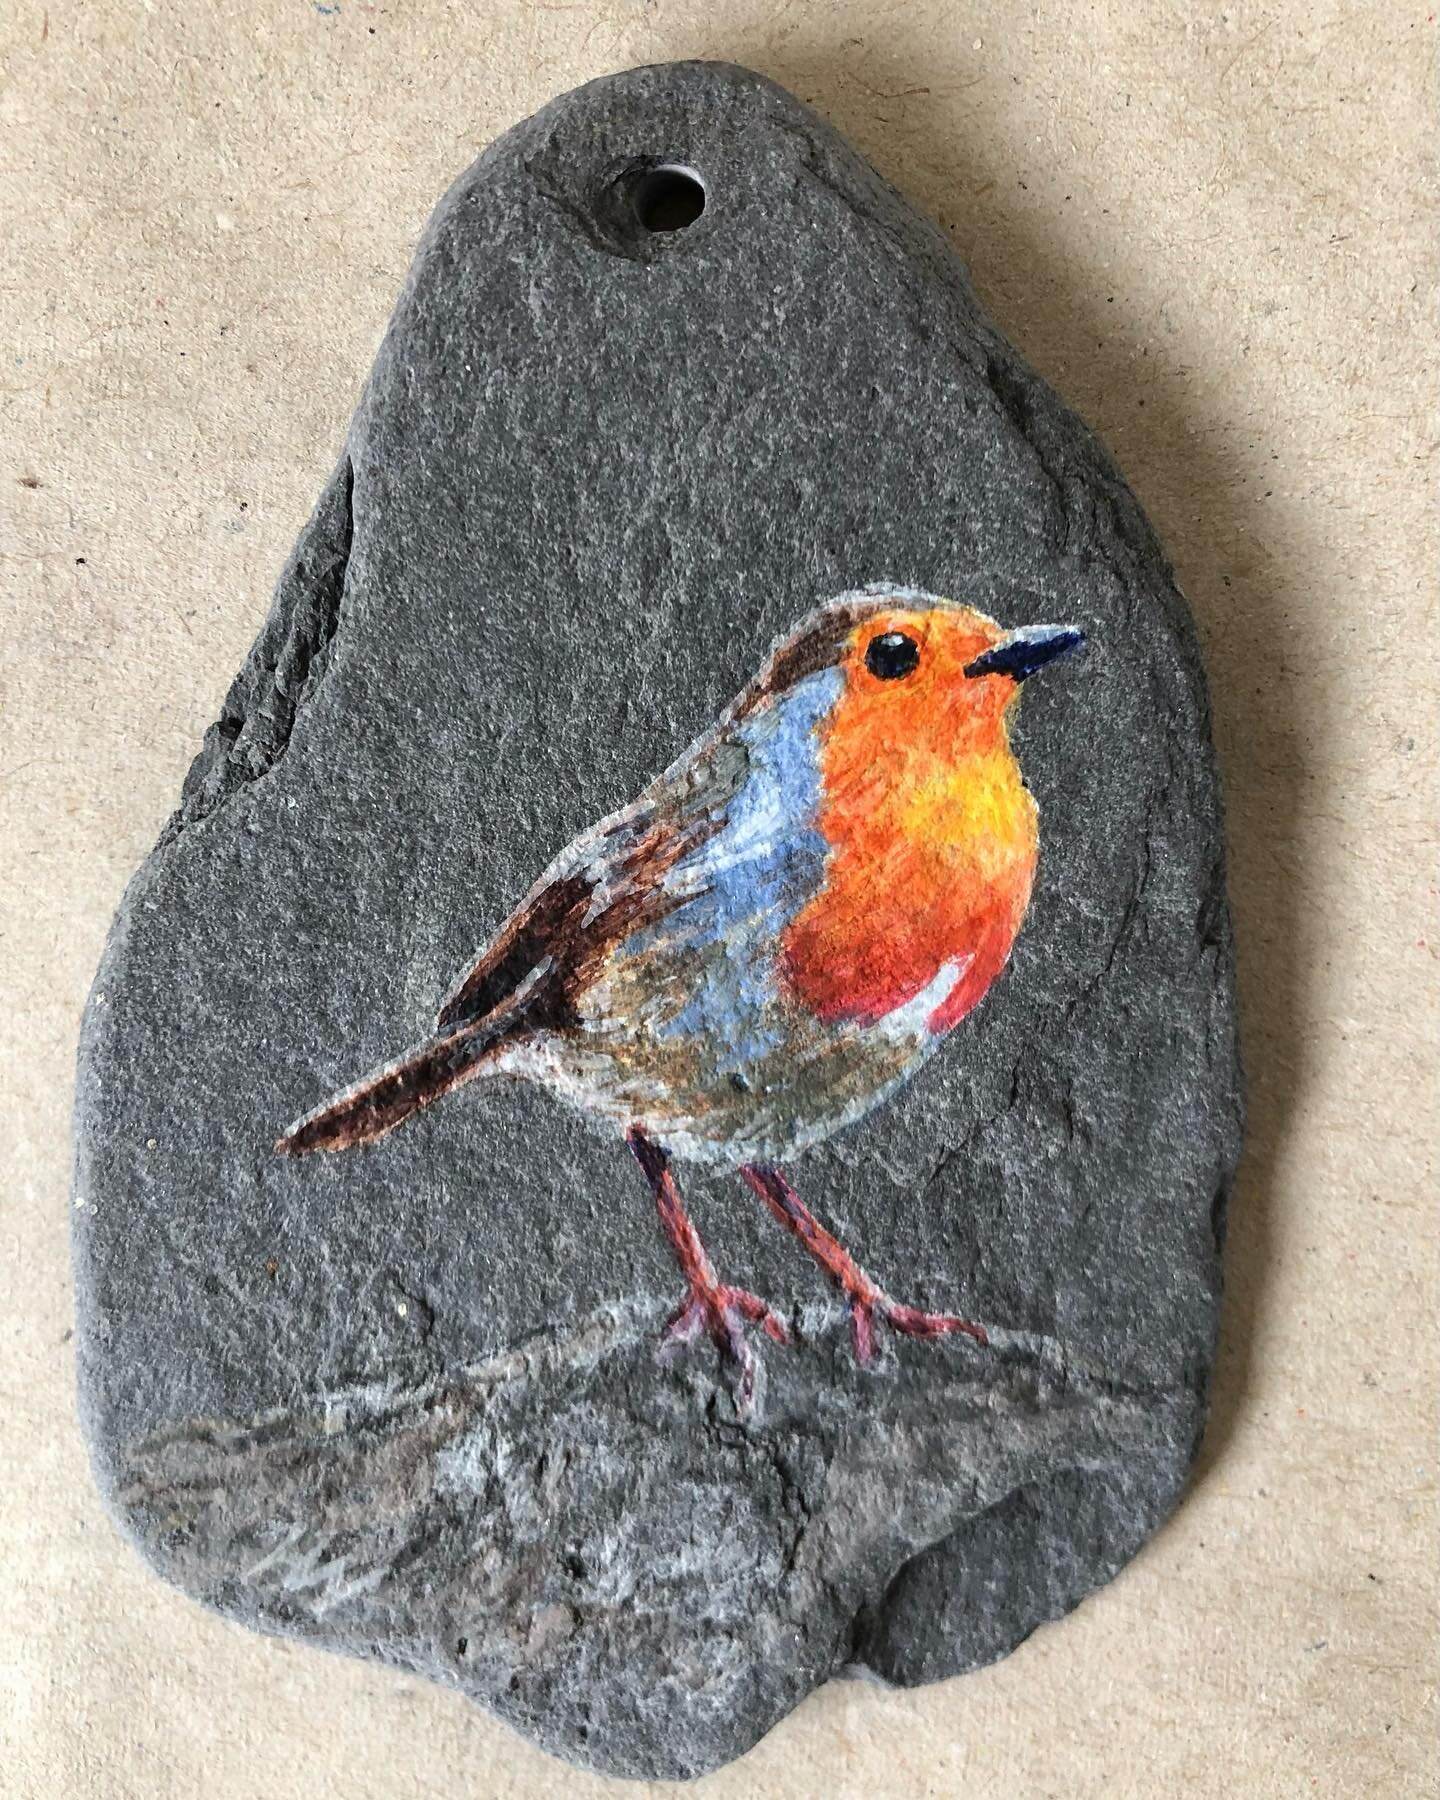 Mini painting on slate. For sale along with many others this Saturday, April 1st at the Echt Daffodil Tea 2 - 4pm, Echt Community Hall, Aberdeenshire #robin #wildlife #nature #painting #miniartwork #aberdeenshire